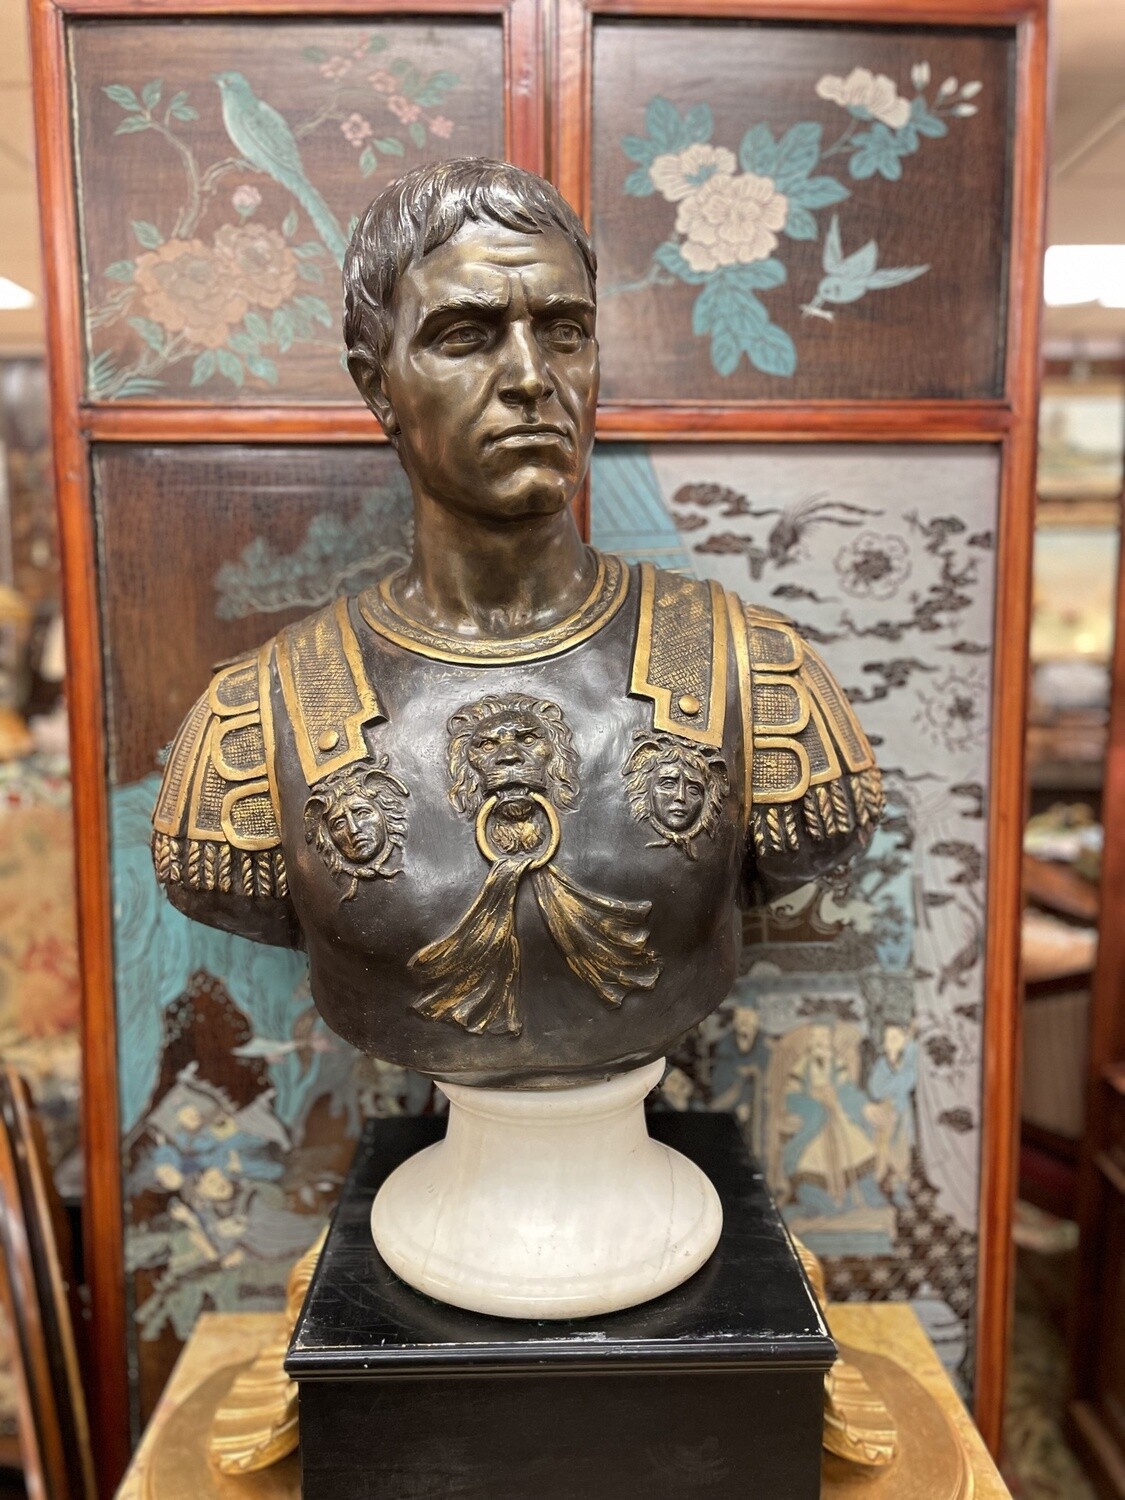 Larger than Life Bronze and Gilt Bust of Julius Cesar. 31 inches tall in total, 25 inches wide, on an 11 inch wide and 6 inch tall White Marble Base